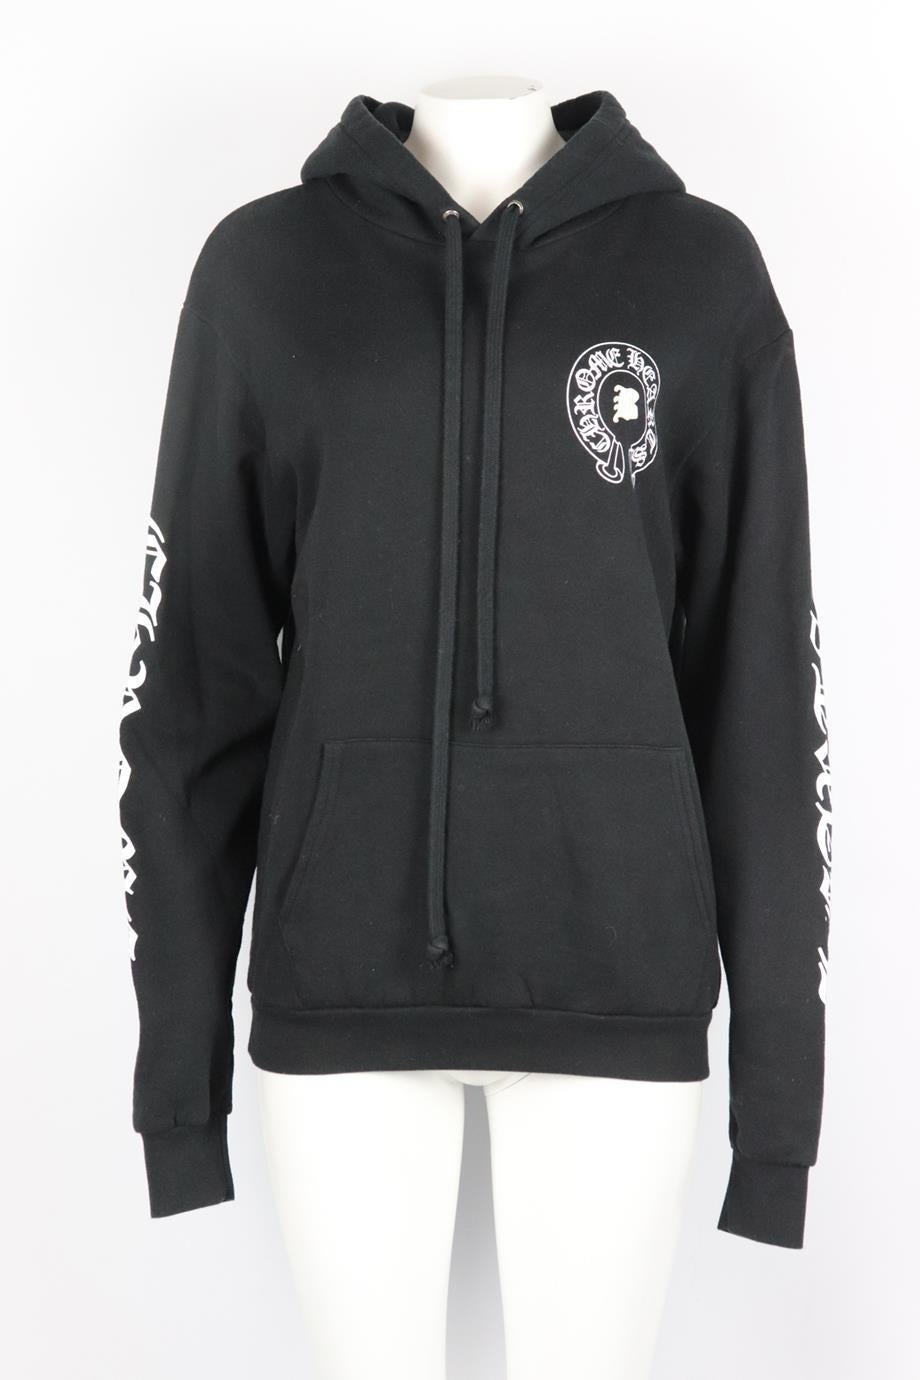 Chrome Hearts + Bella Hadid printed cotton jersey hoodie. Black and white. Long sleeve, crewneck. Slips on. 100% Cotton. Size: Medium (UK 10, US 6, FR 38, IT 42). Bust: 42 in. Waist: 40 in. Hips: 34 in. Length: 26.5 in. Very good condition - No sign